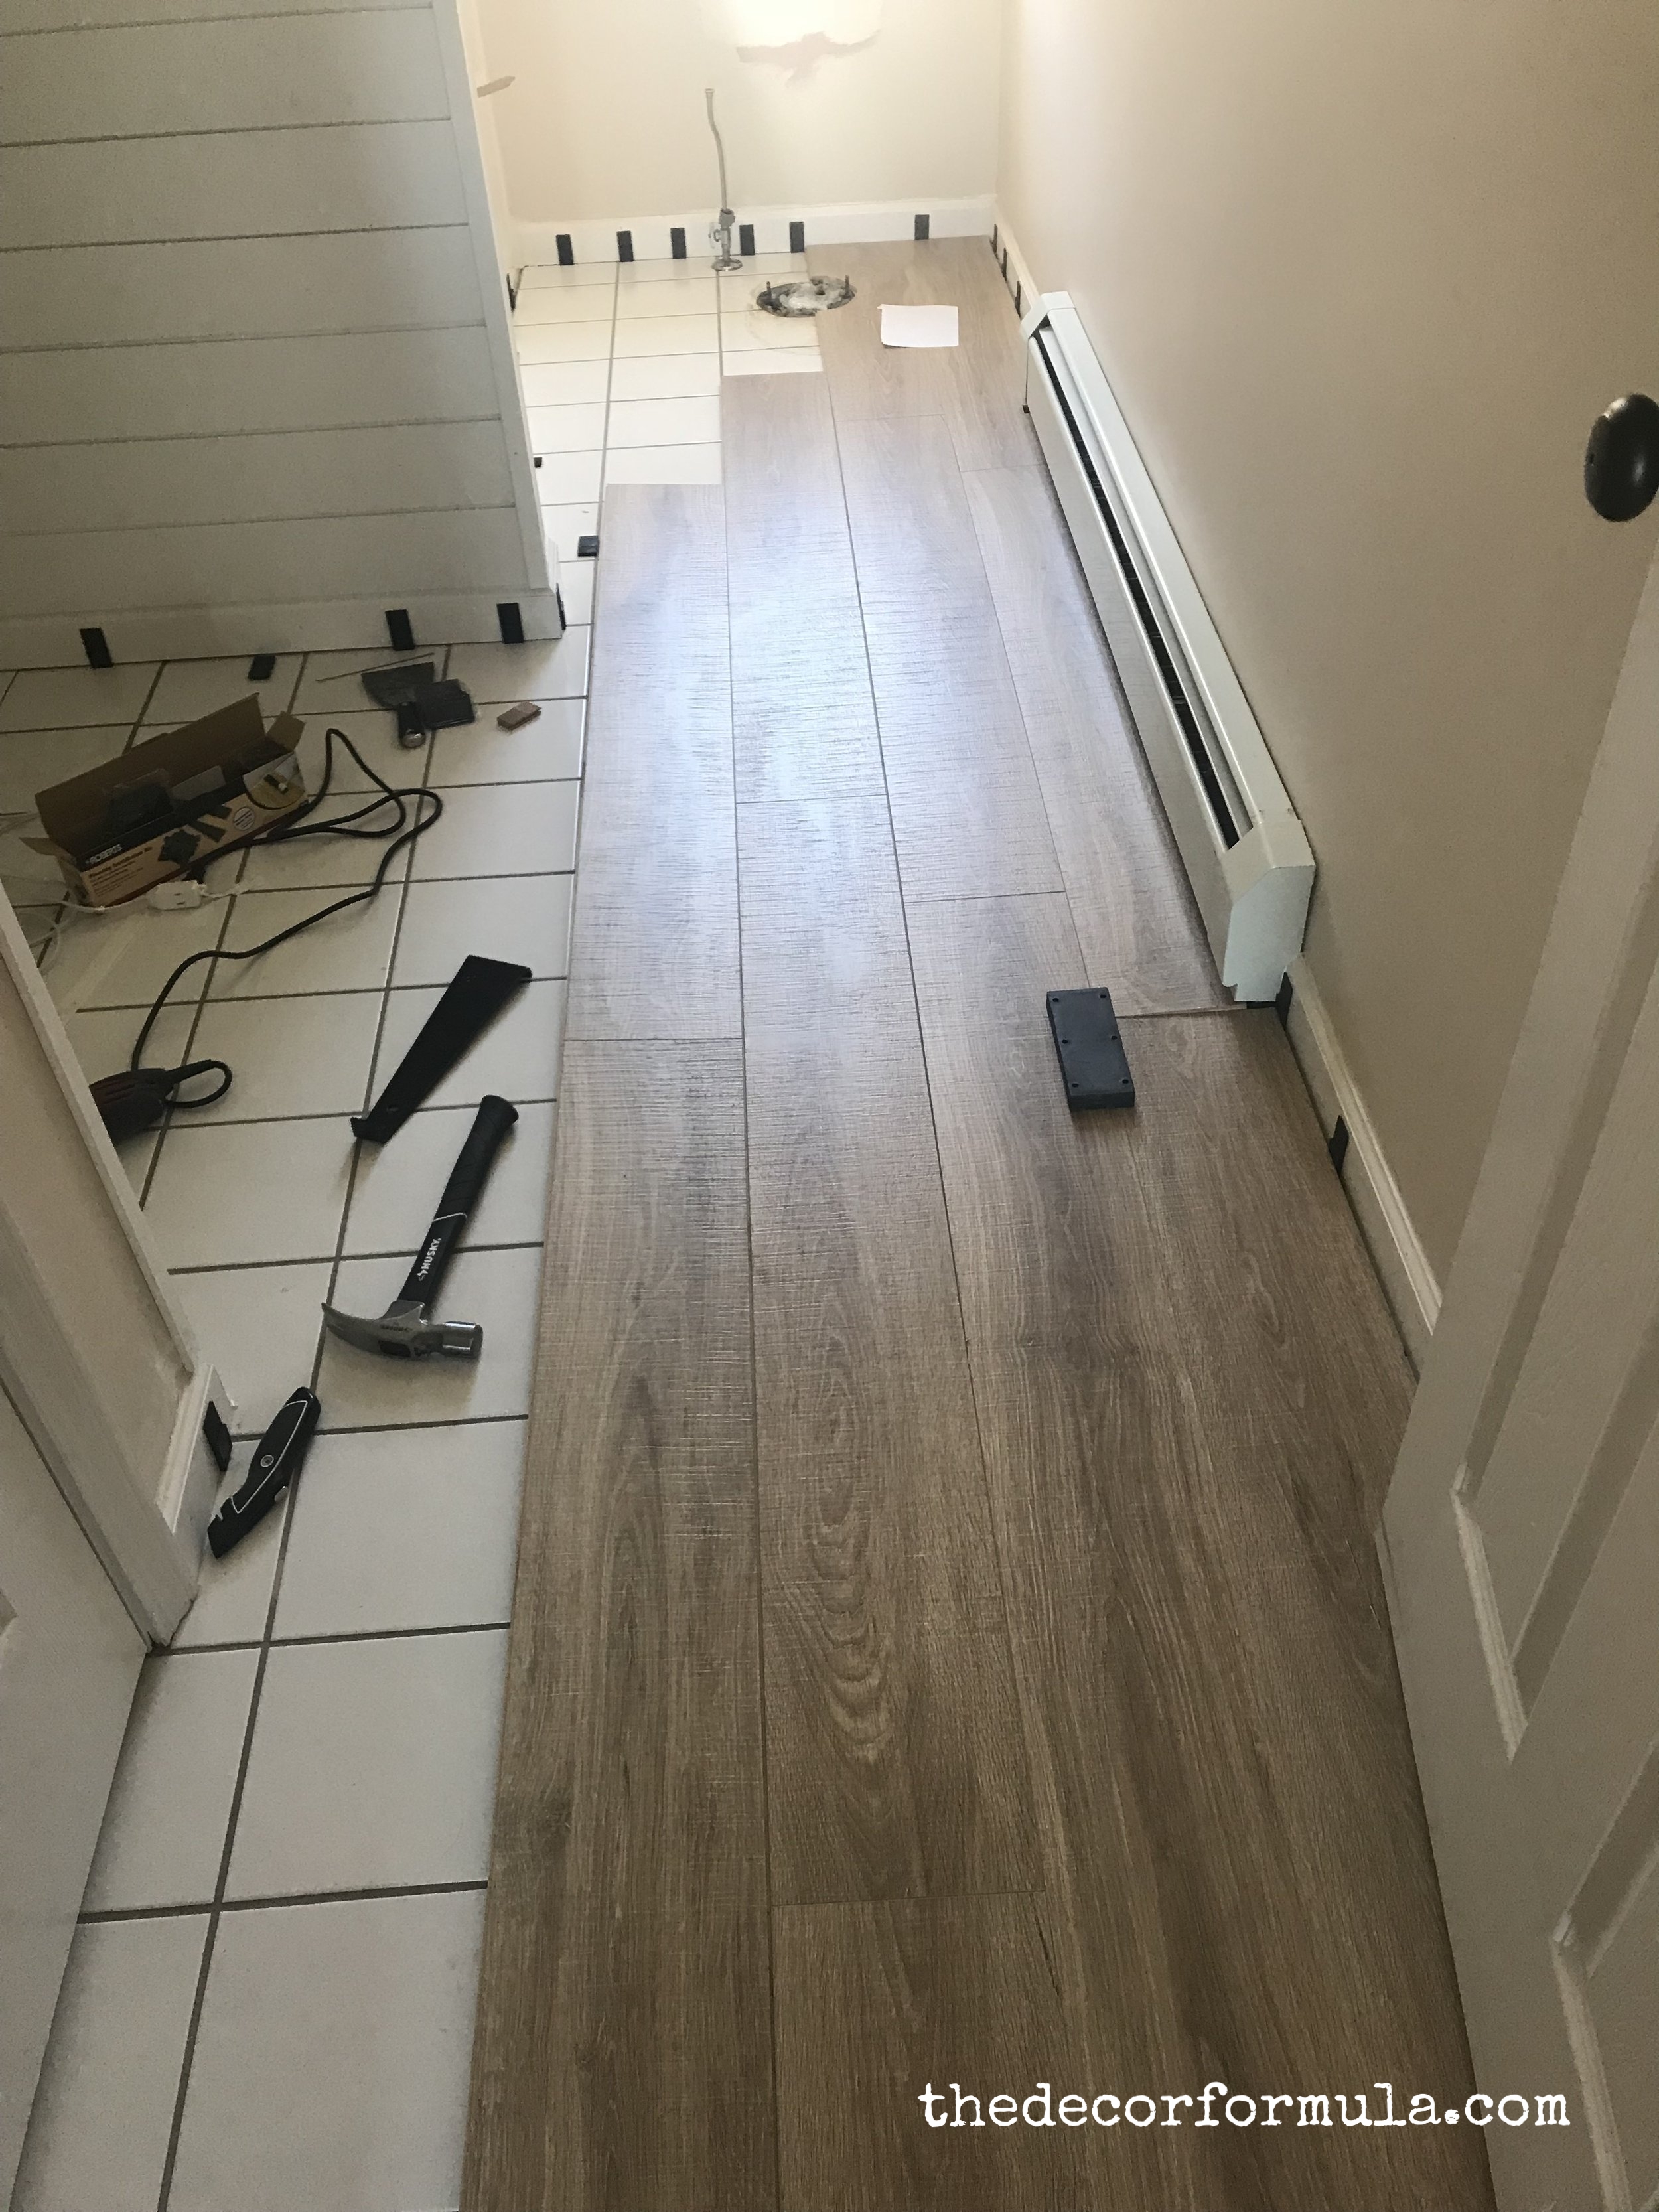 Ideas For Covering Up Tile Floors, Can Wood Floors Be Installed Over Tile